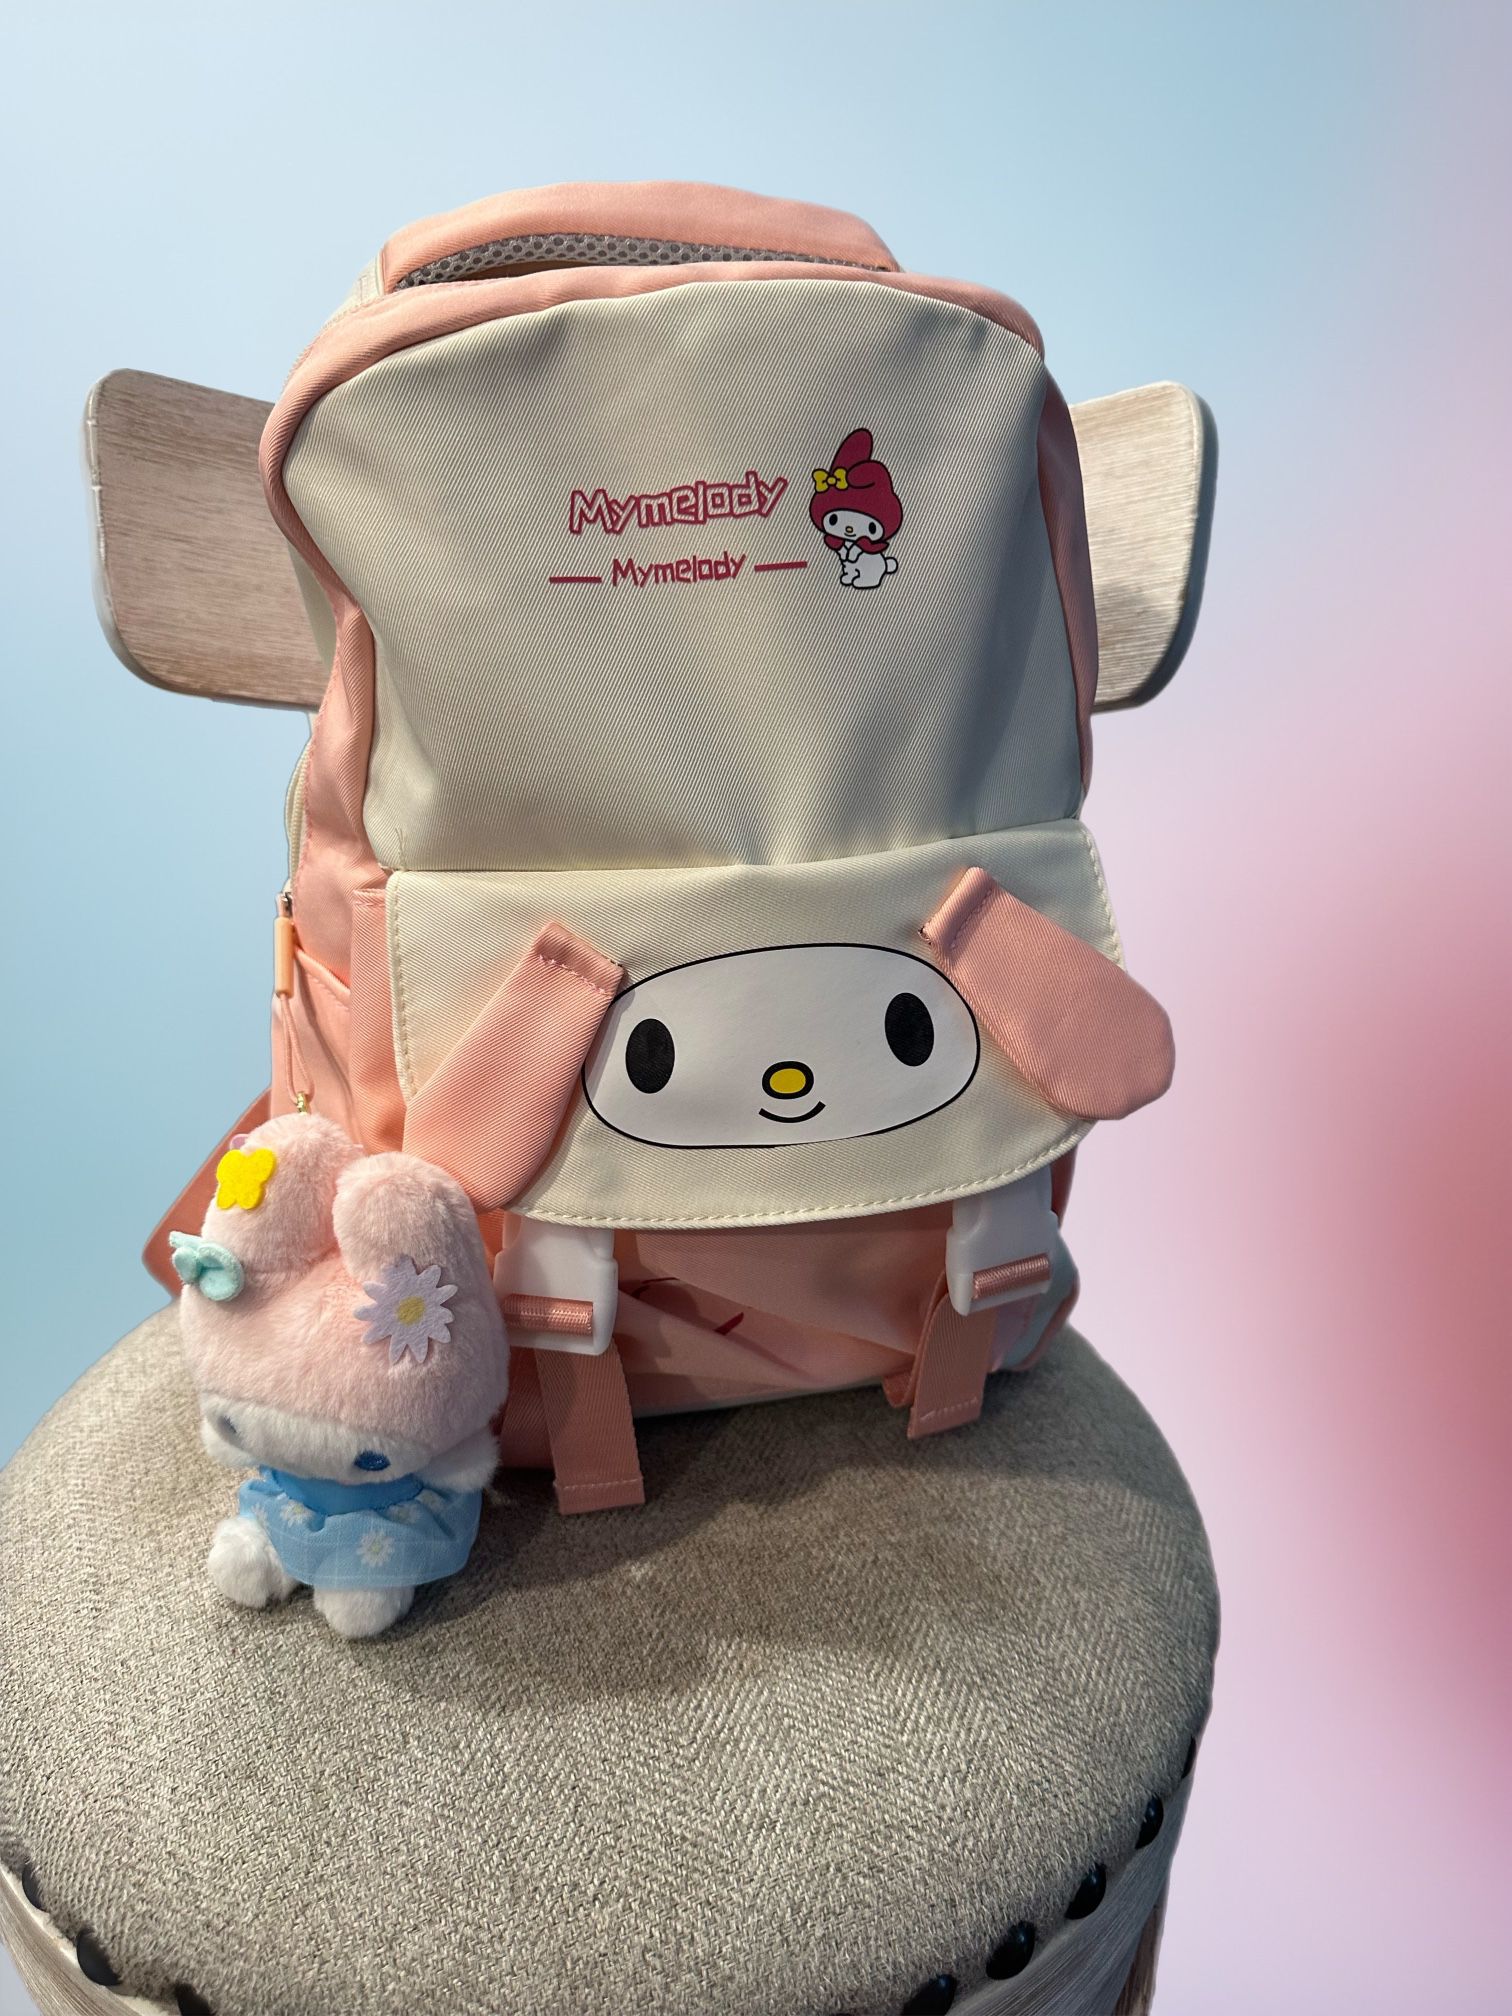 My Melody backpack with bonus gift